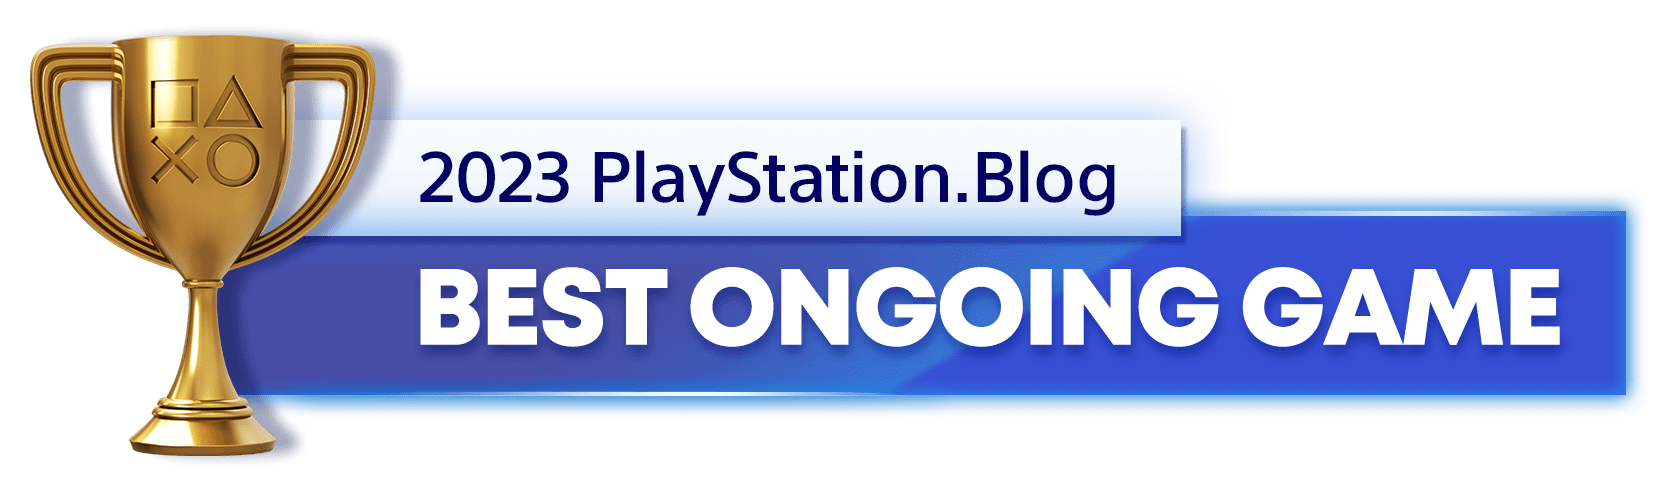 Gold Trophy for the 2023 PlayStation Blog Best Ongoing Game Winner